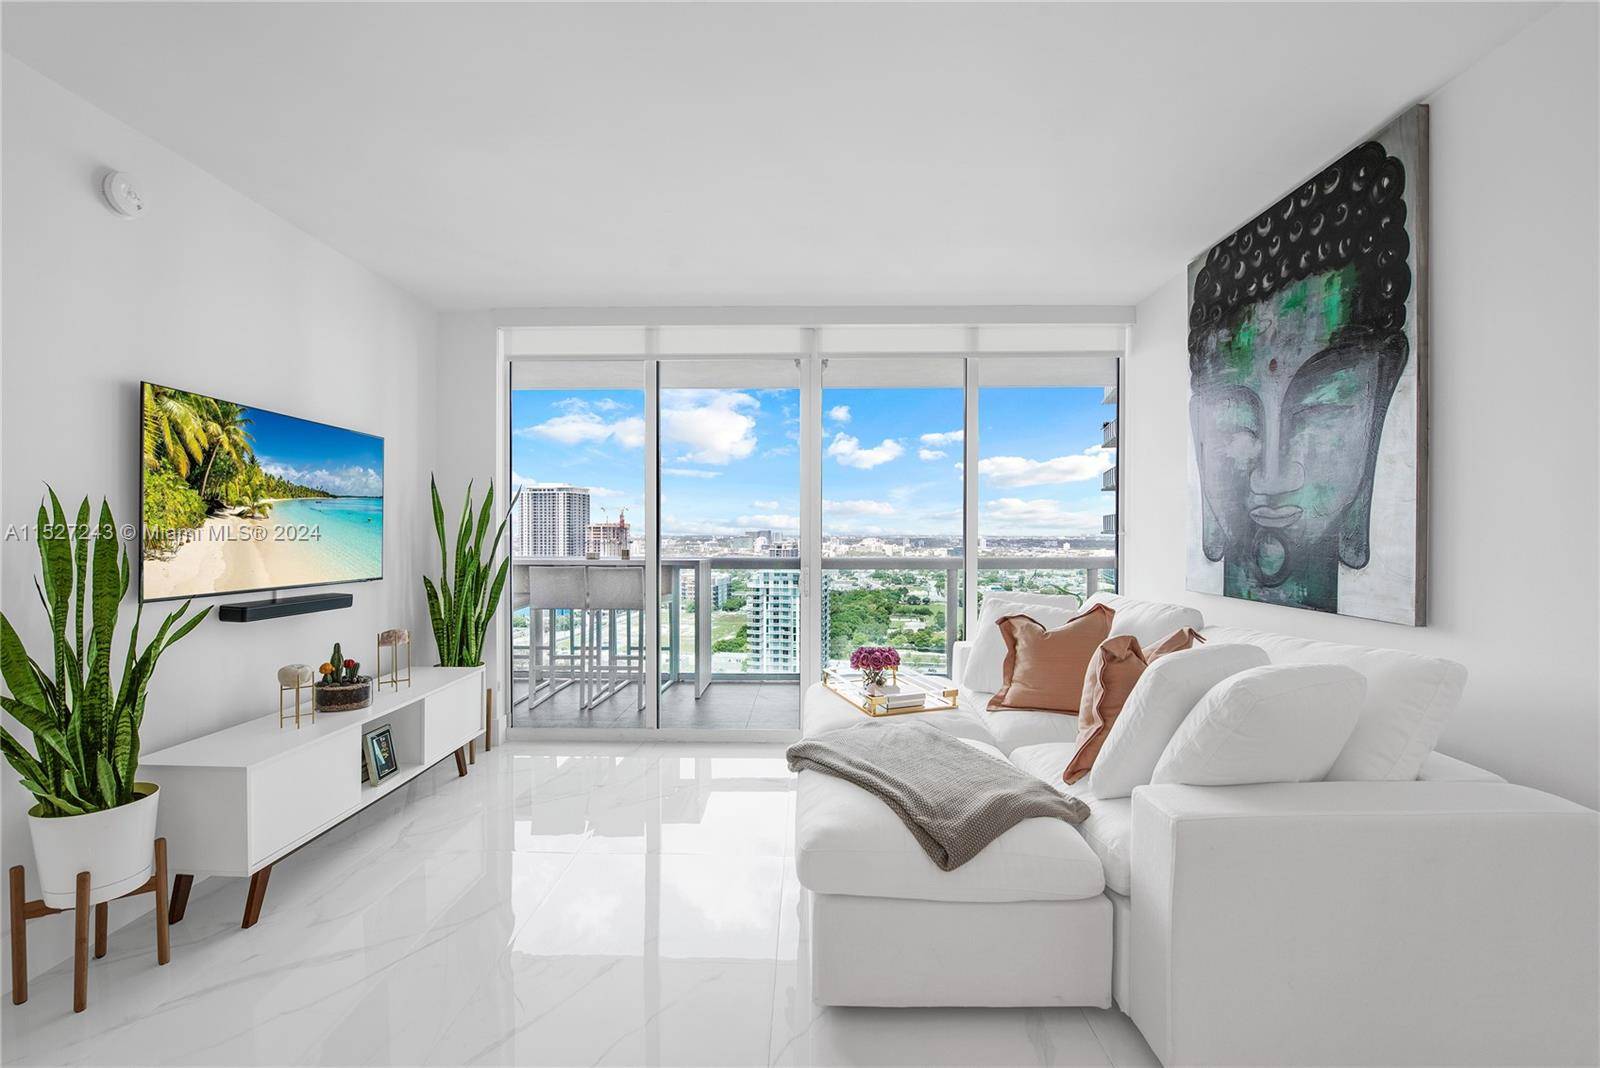 Floor to ceiling windows and 32 x 48 Santorini tile bring an abundance of natural light to this modern 2 bedroom, 2 bathroom unit on the 29th floor.